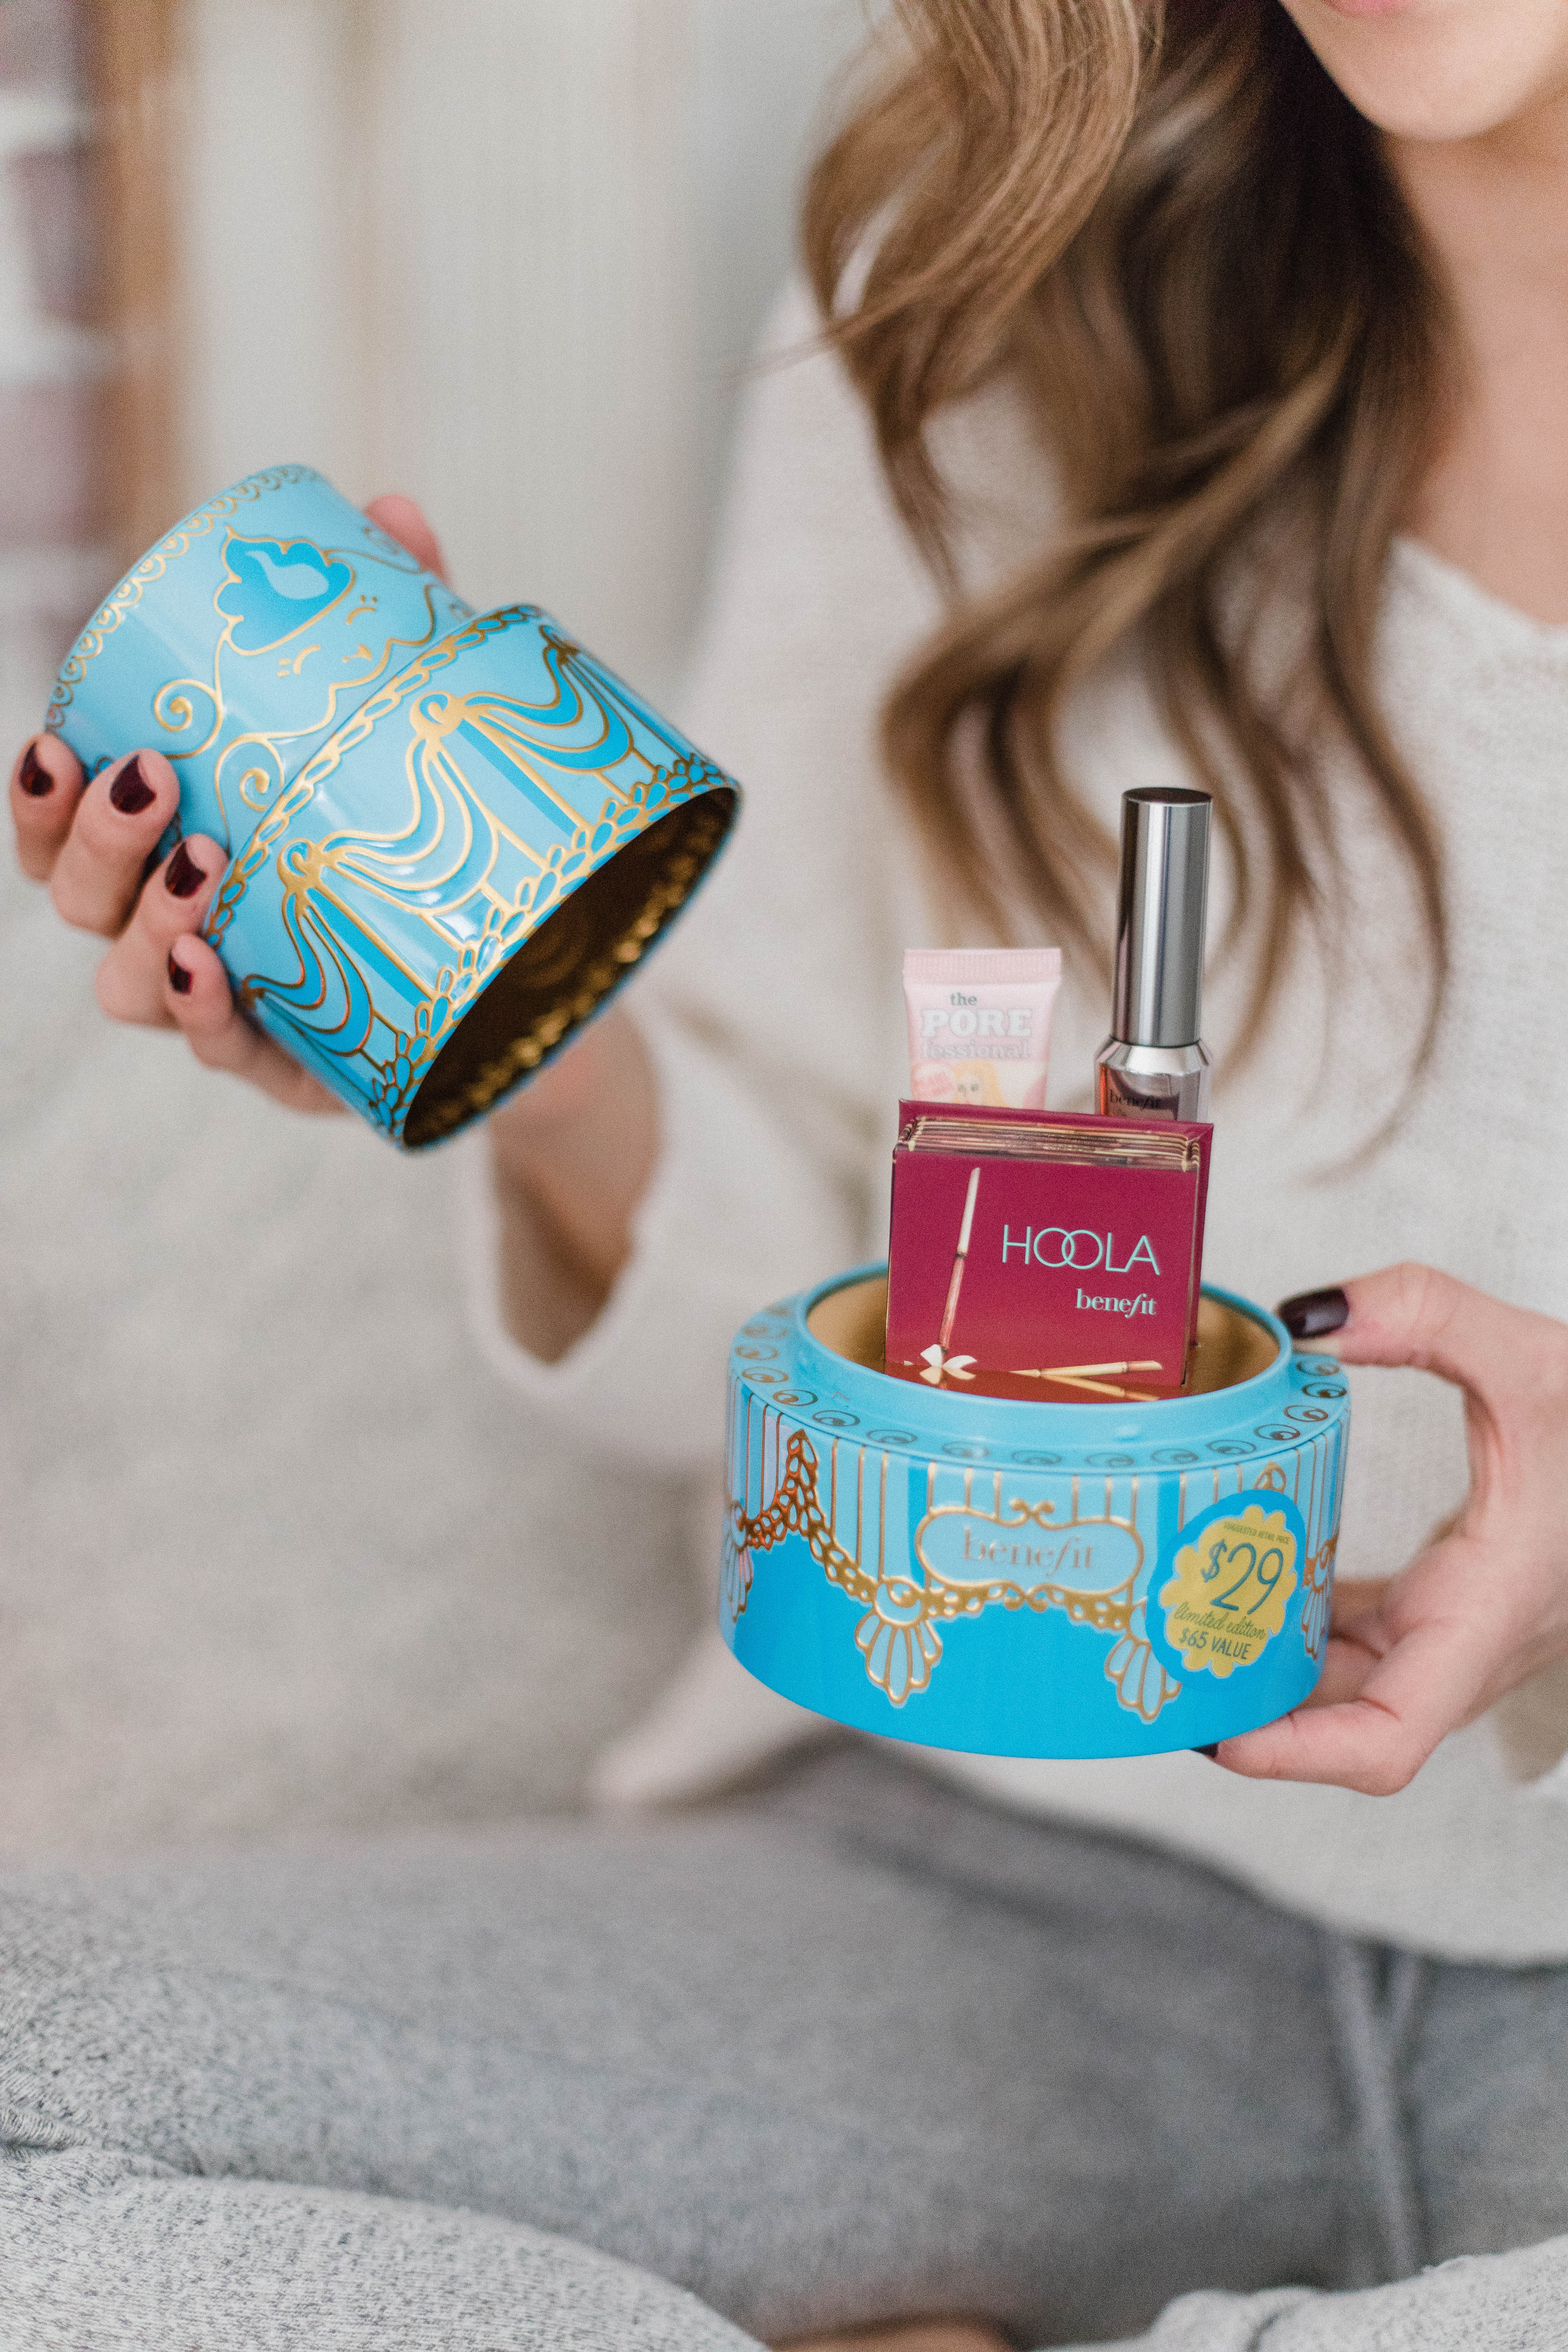 Connecticut life and style blogger Lauren McBride shares beauty gift ideas under $50 including budget-friendly stocking stuffers and gift exchange ideas.